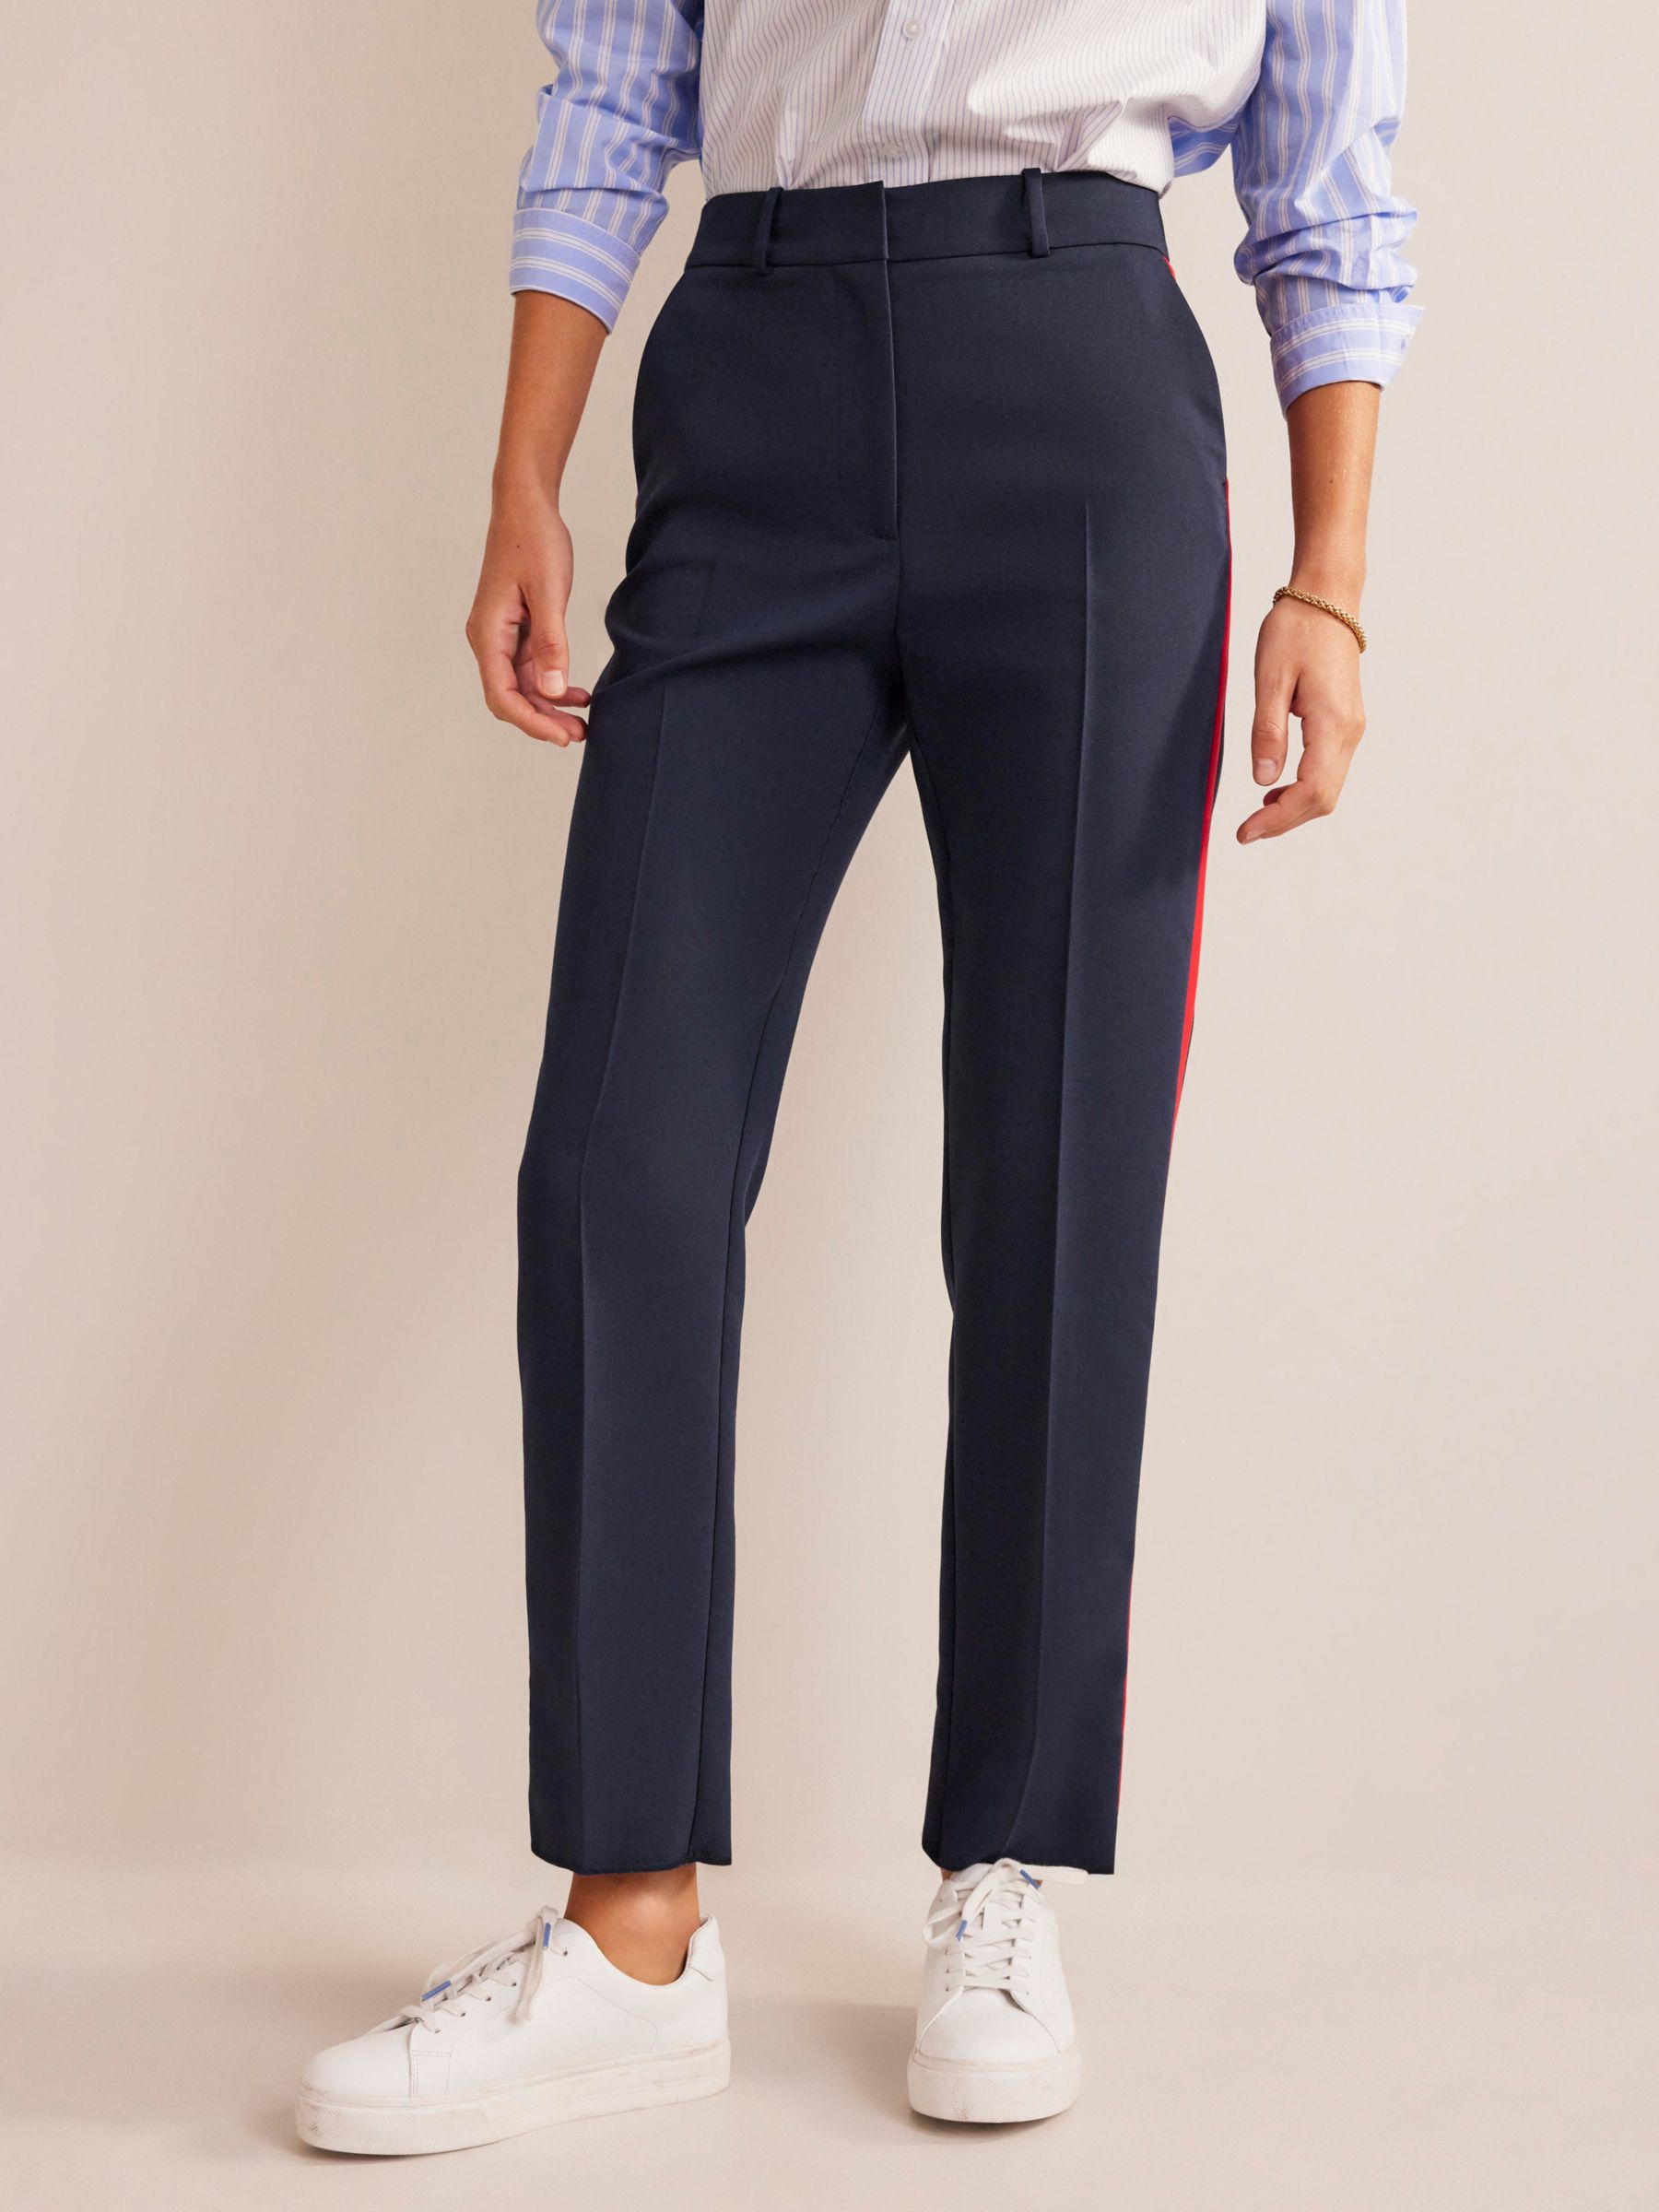 Boden Kew Side Stripe Tapered Trousers, Navy/Red at John Lewis & Partners